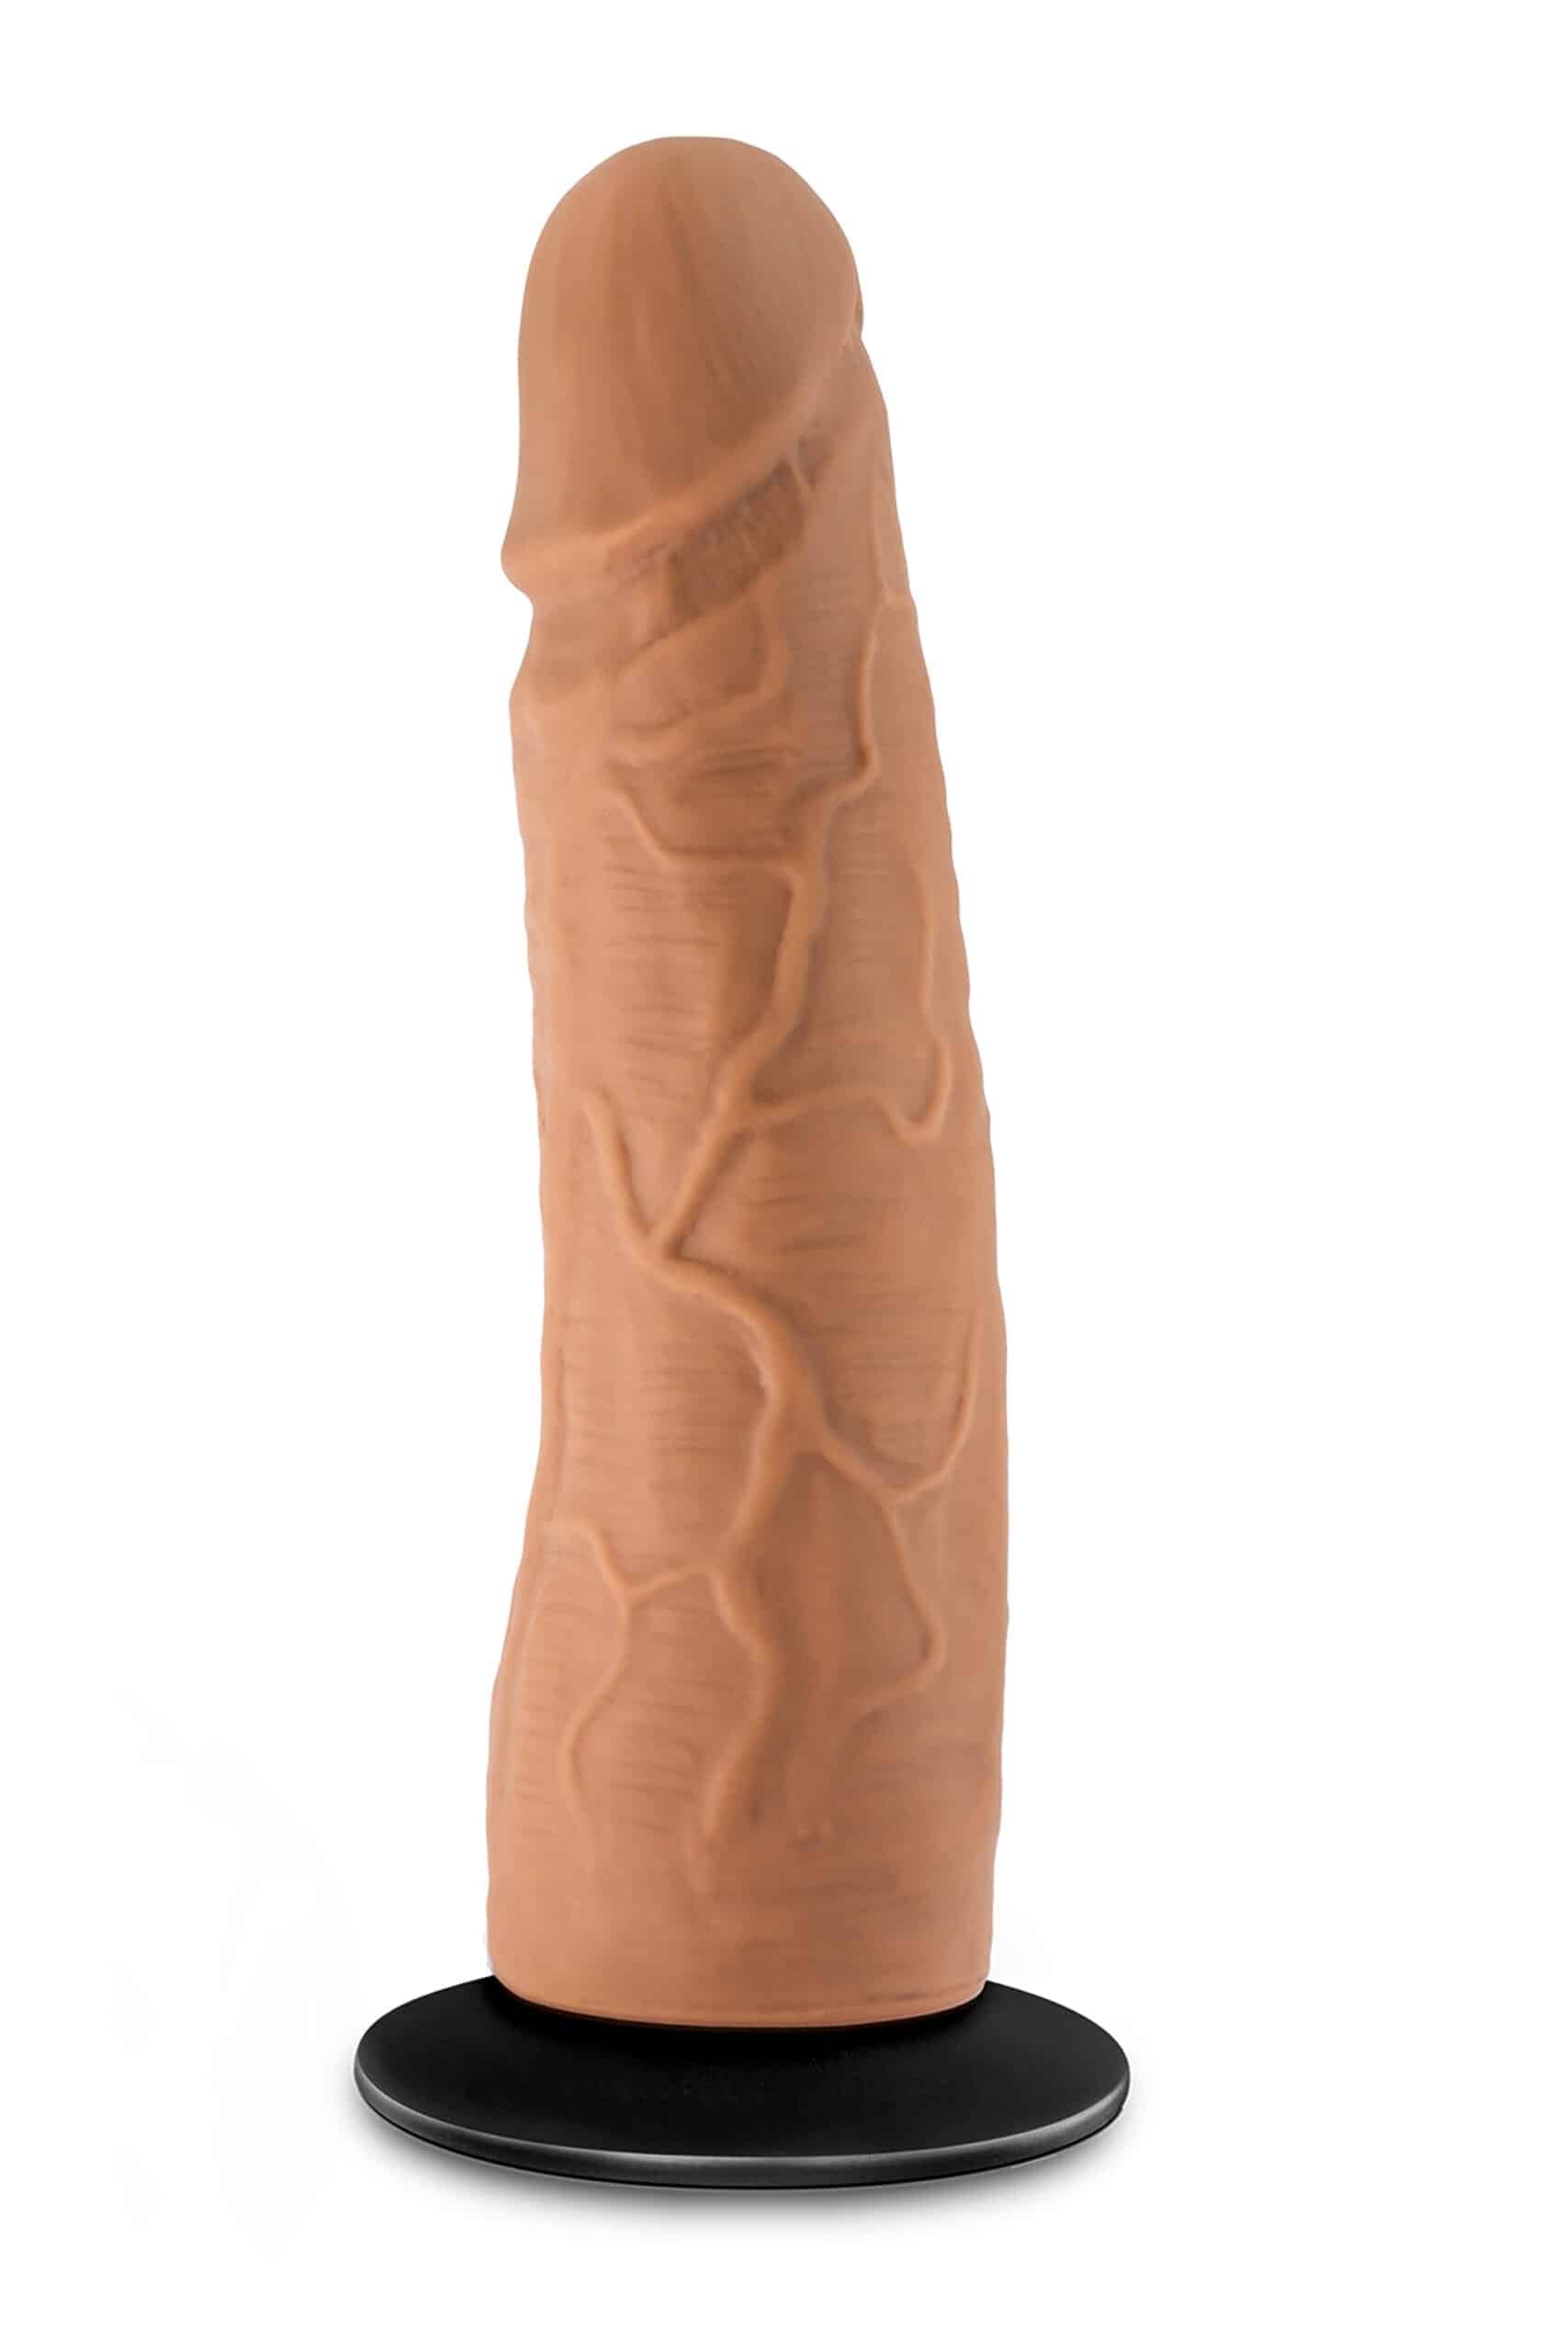 19207-lock-on-dynamite-dildo-with-suction-cup-adapter-mocha-17.7-5-cm-love-shop-cy